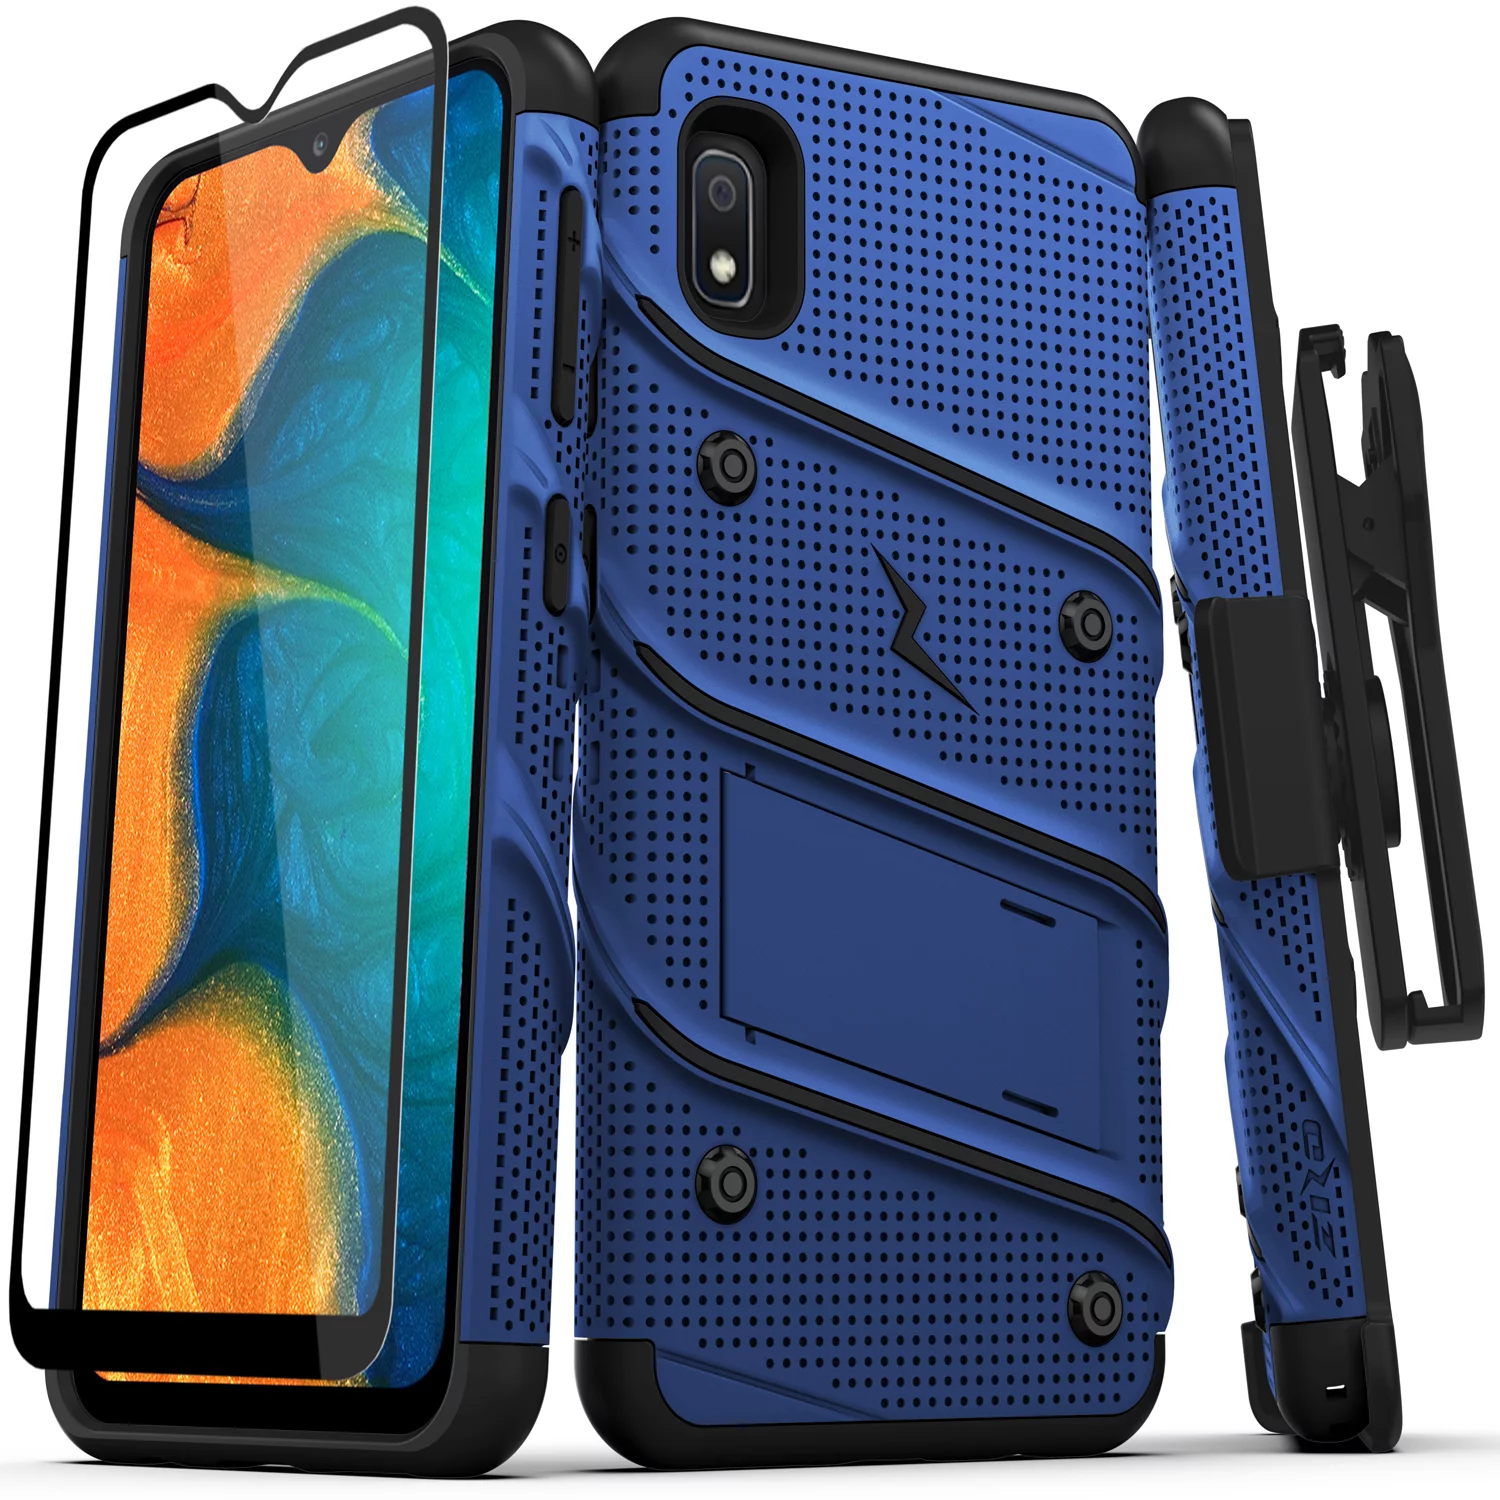 ZIZO BOLT Series for Samsung Galaxy A10e Case | Heavy-duty Military-grade Drop Protection w/ Kickstand Included Belt Clip Holster Tempered Glass Lanyard (Blue/Black)